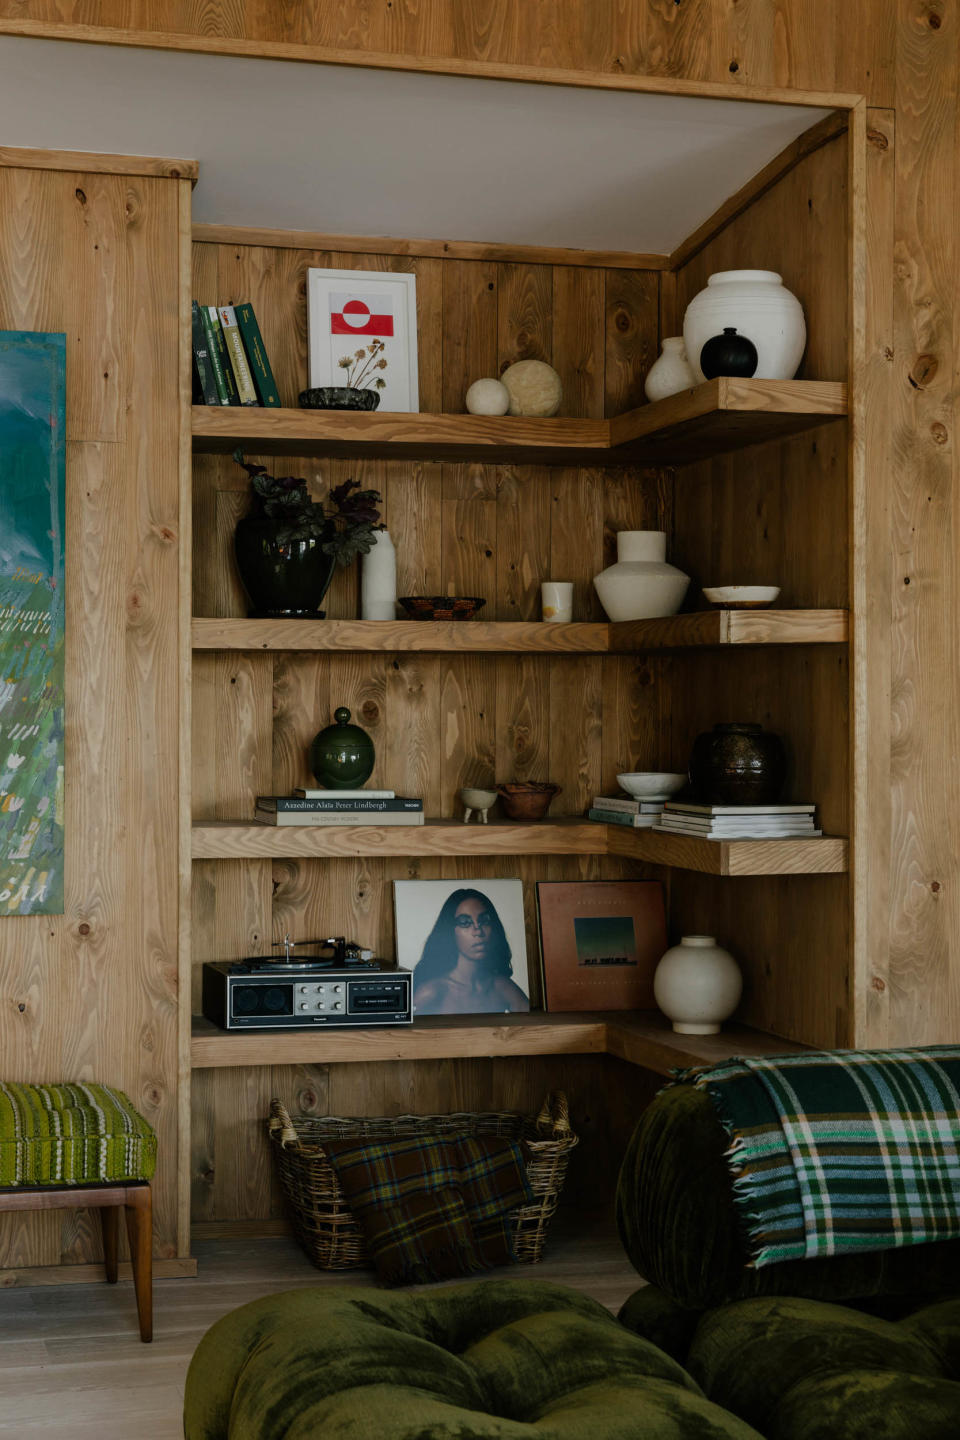 Cozy nooks with custom built-ins offer opportunities to show off personal items.